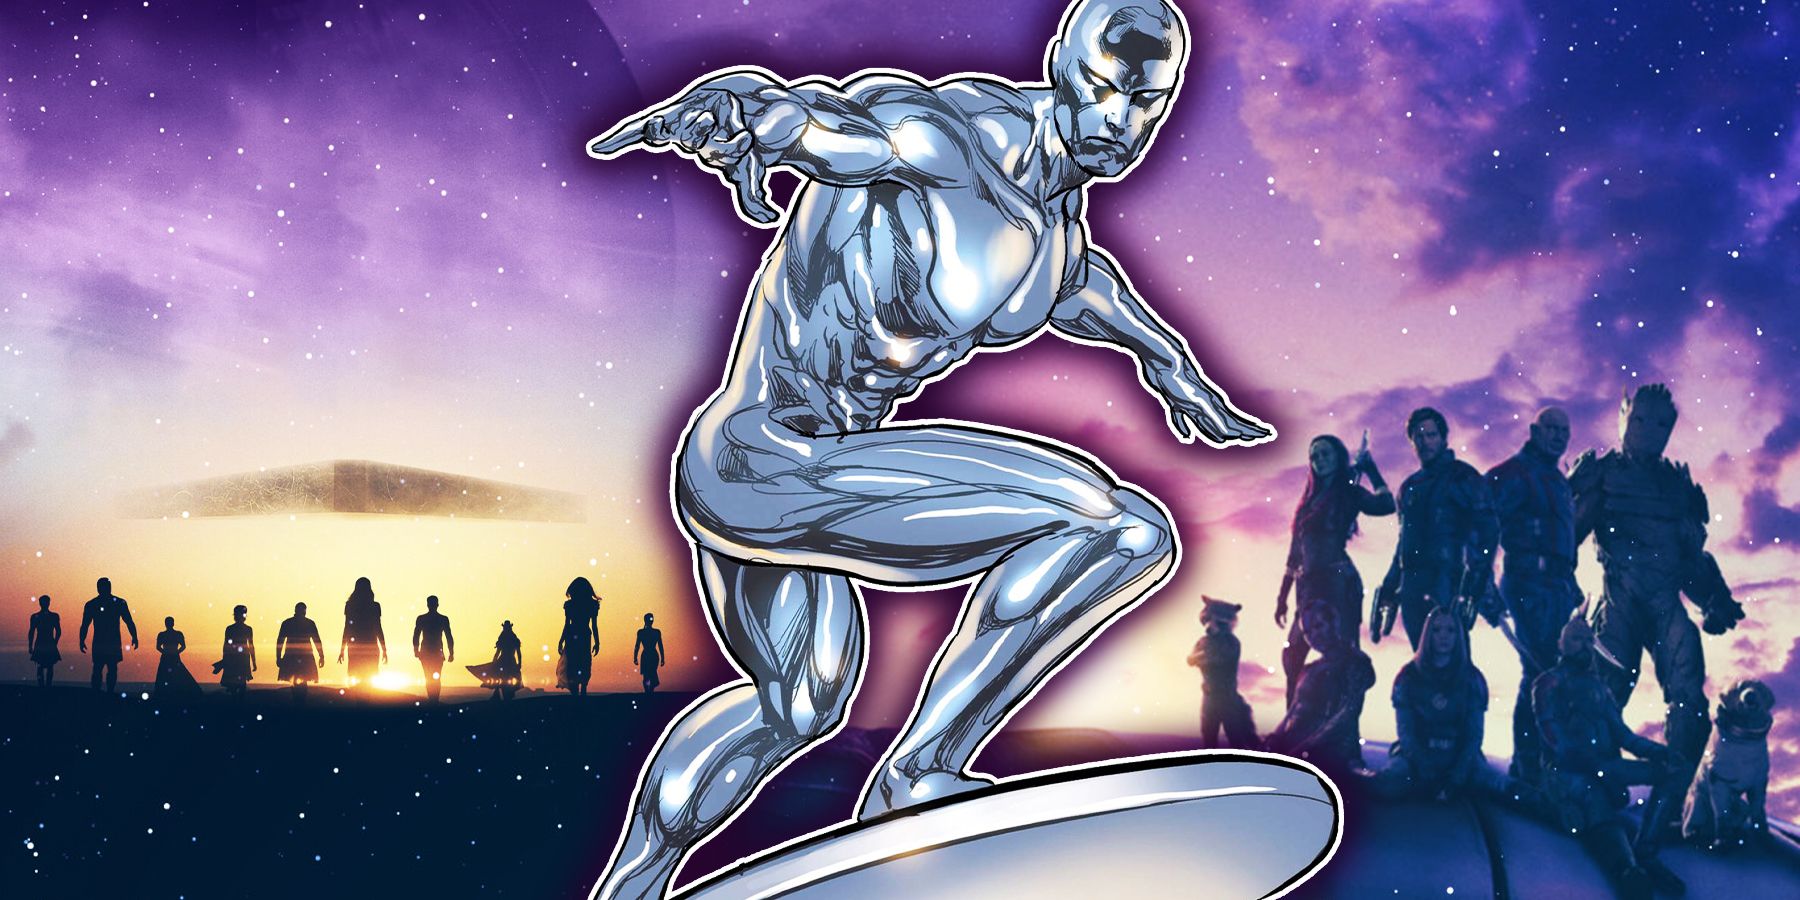 Silver Surfer with the Eternals and the Guardians of the Galaxy